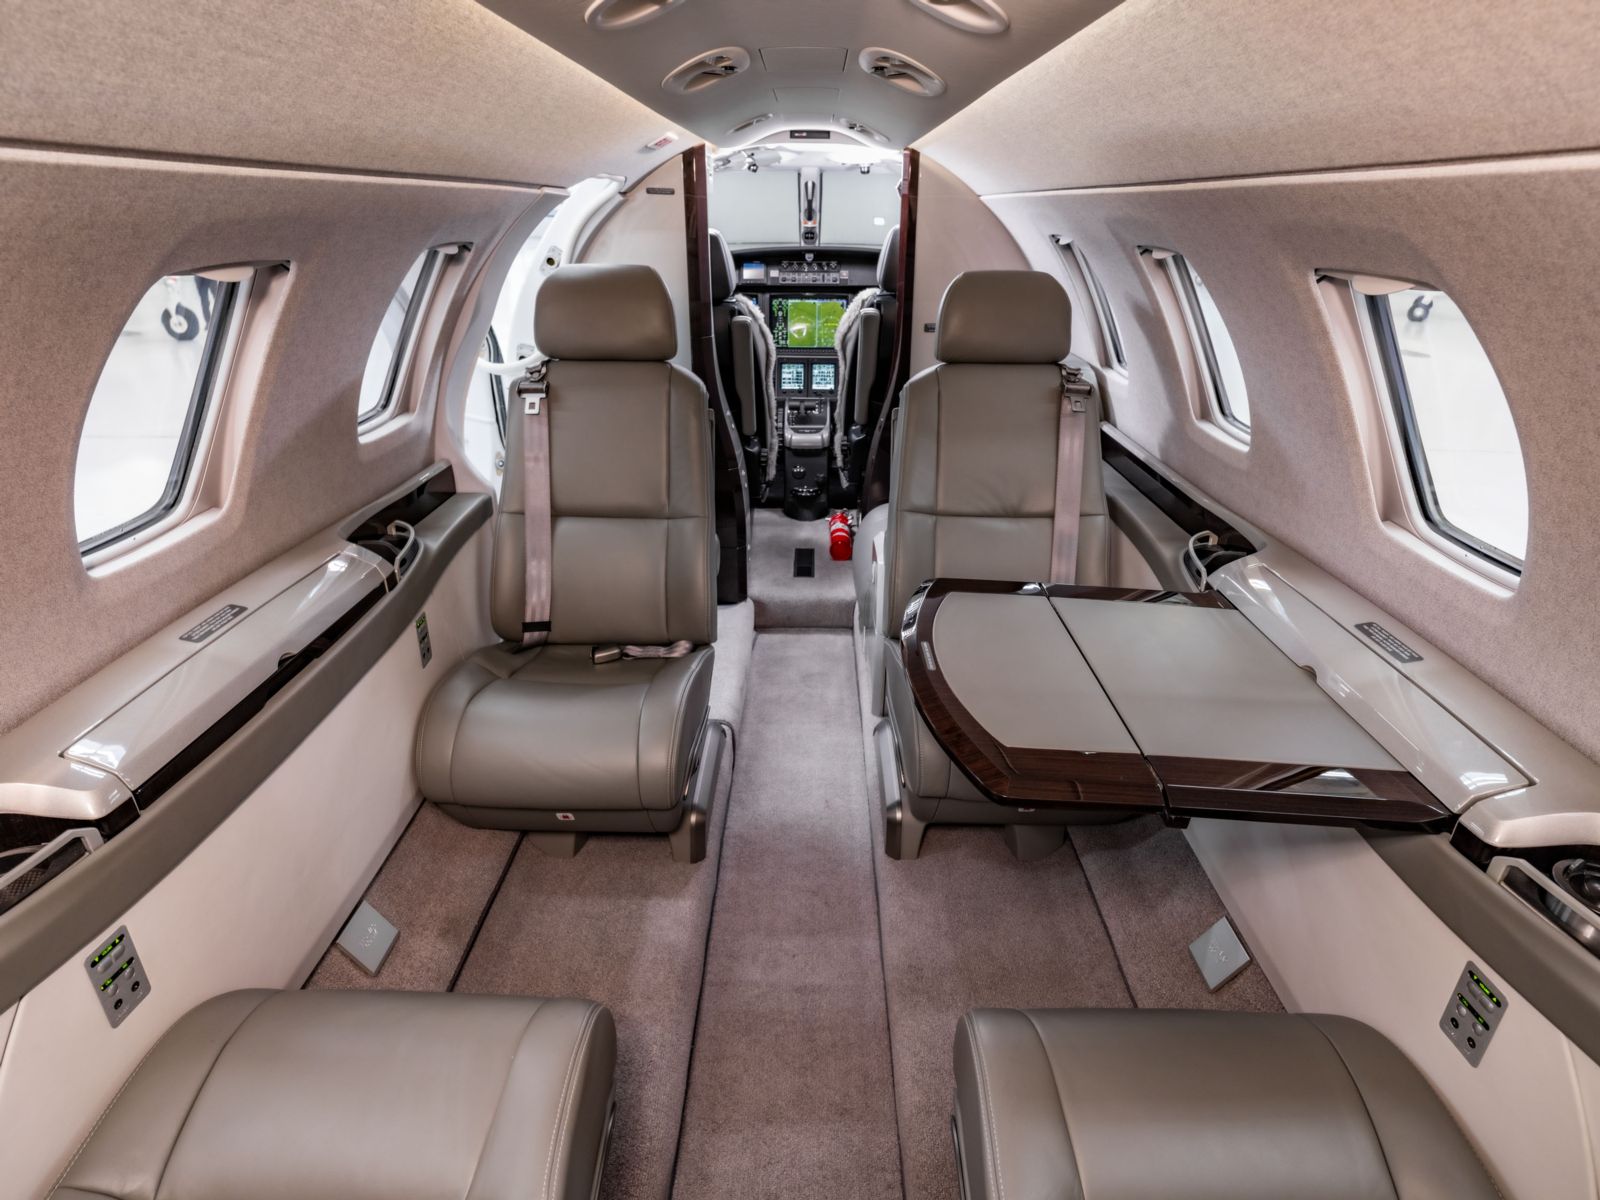 Cessna/Textron Citation M2  S/N 1107 for sale | gallery image: /userfiles/images/M2%201107/2022-03-08%2007_51_58.jpg